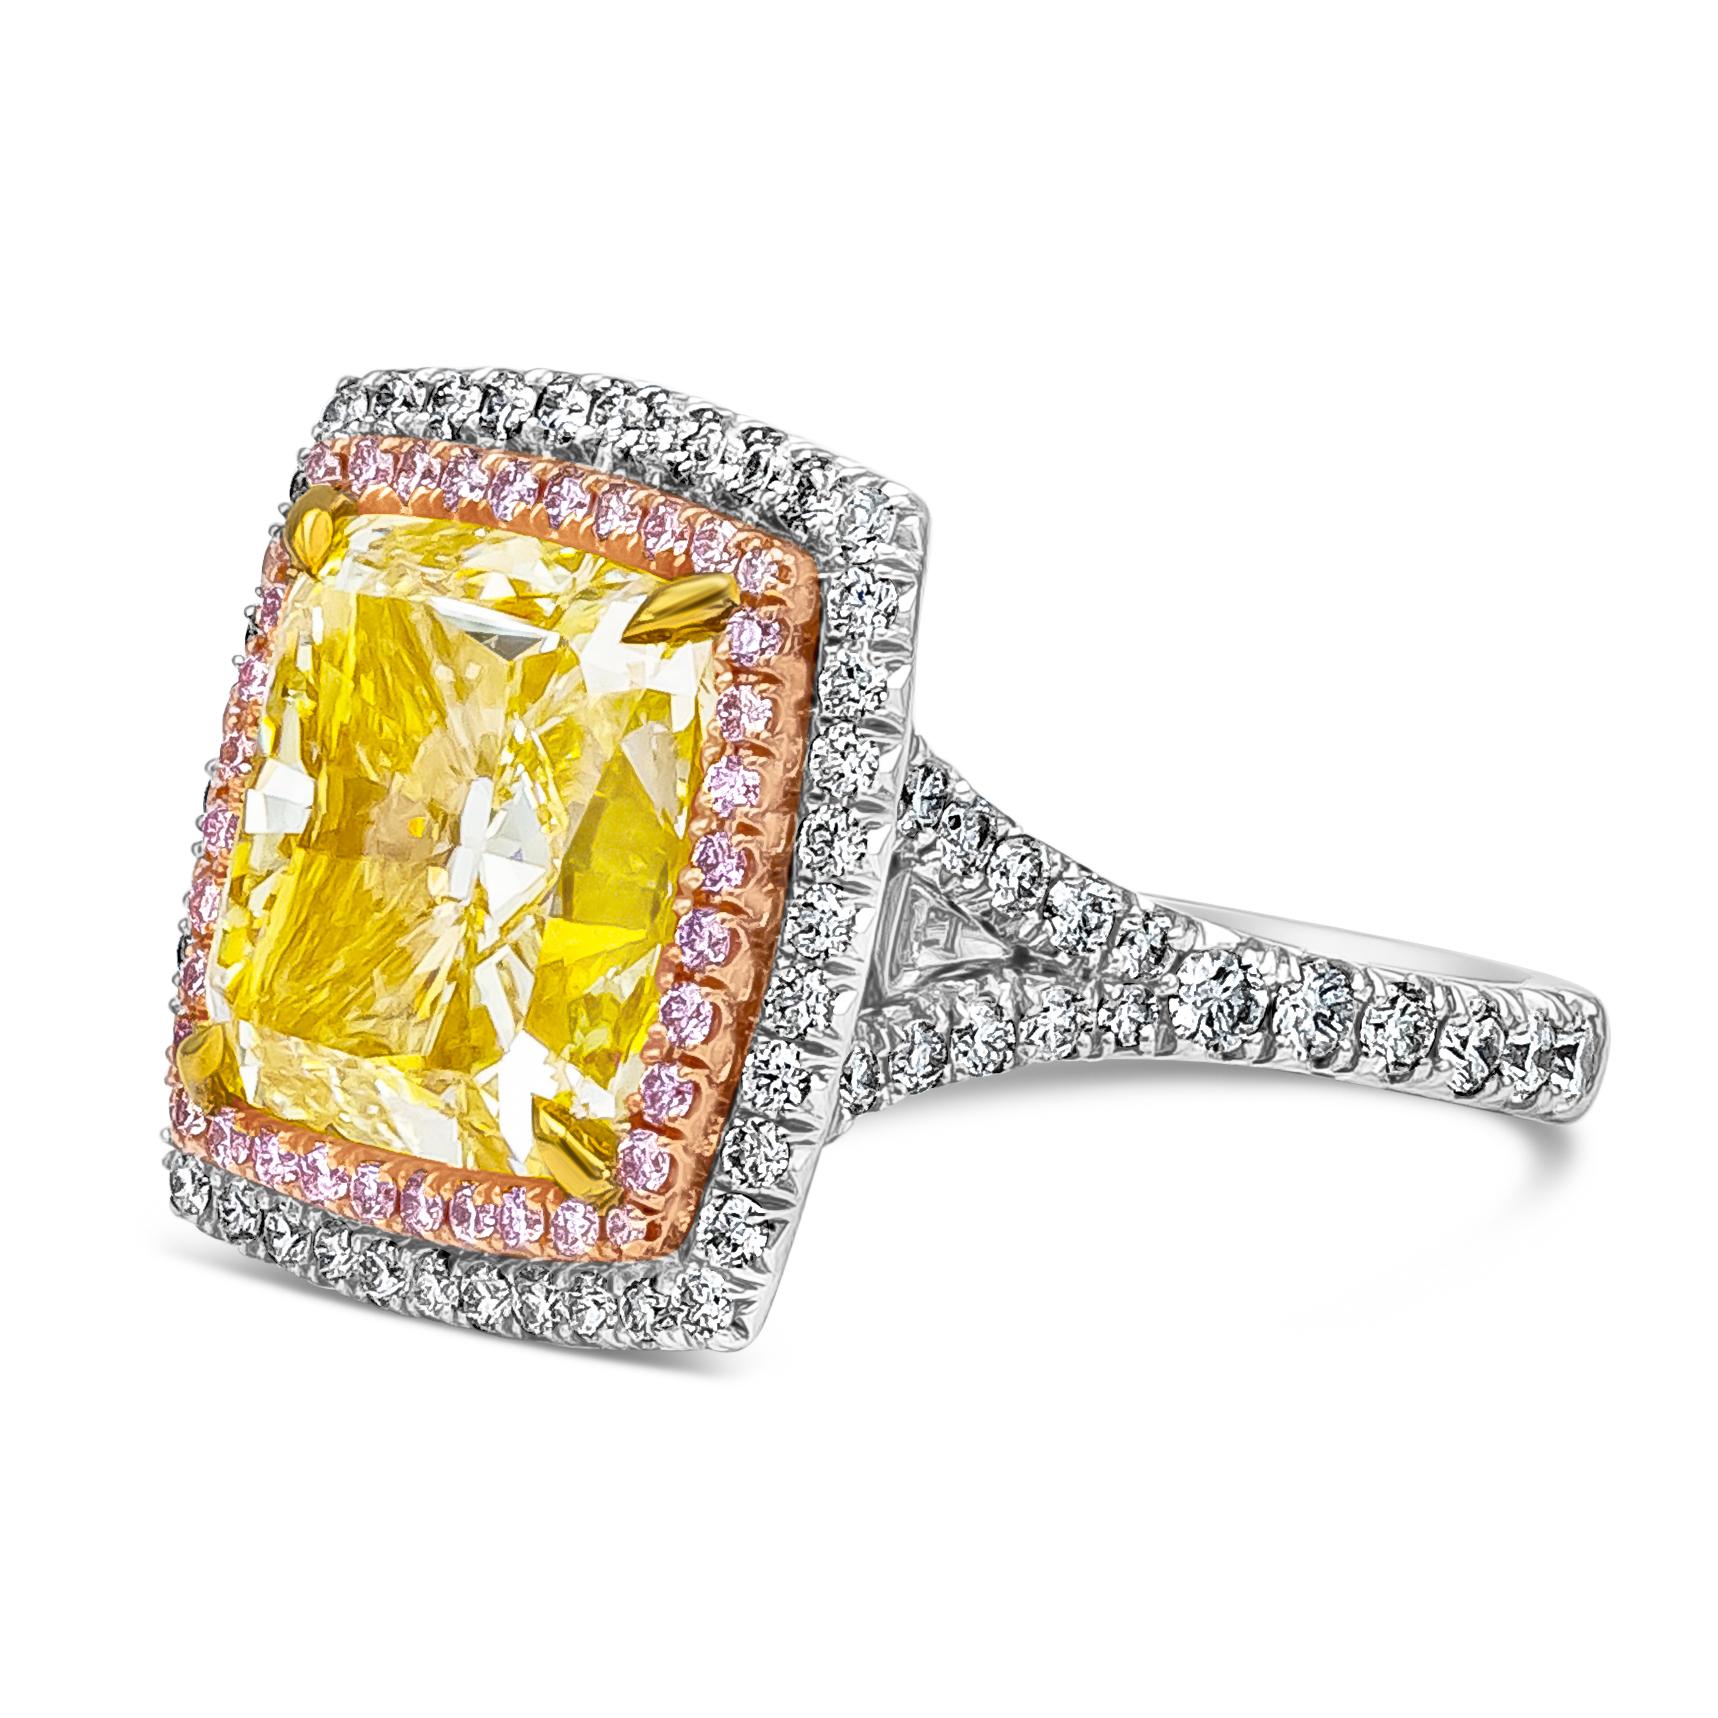 A beautiful and elegantly made, statement engagement ring features a GIA Certified 10.27 carat total cushion cut fancy yellow diamond, VS2 in Clarity. Surrounded by double halo with pink diamonds on the inner halo weighing 0.30 carats total, and